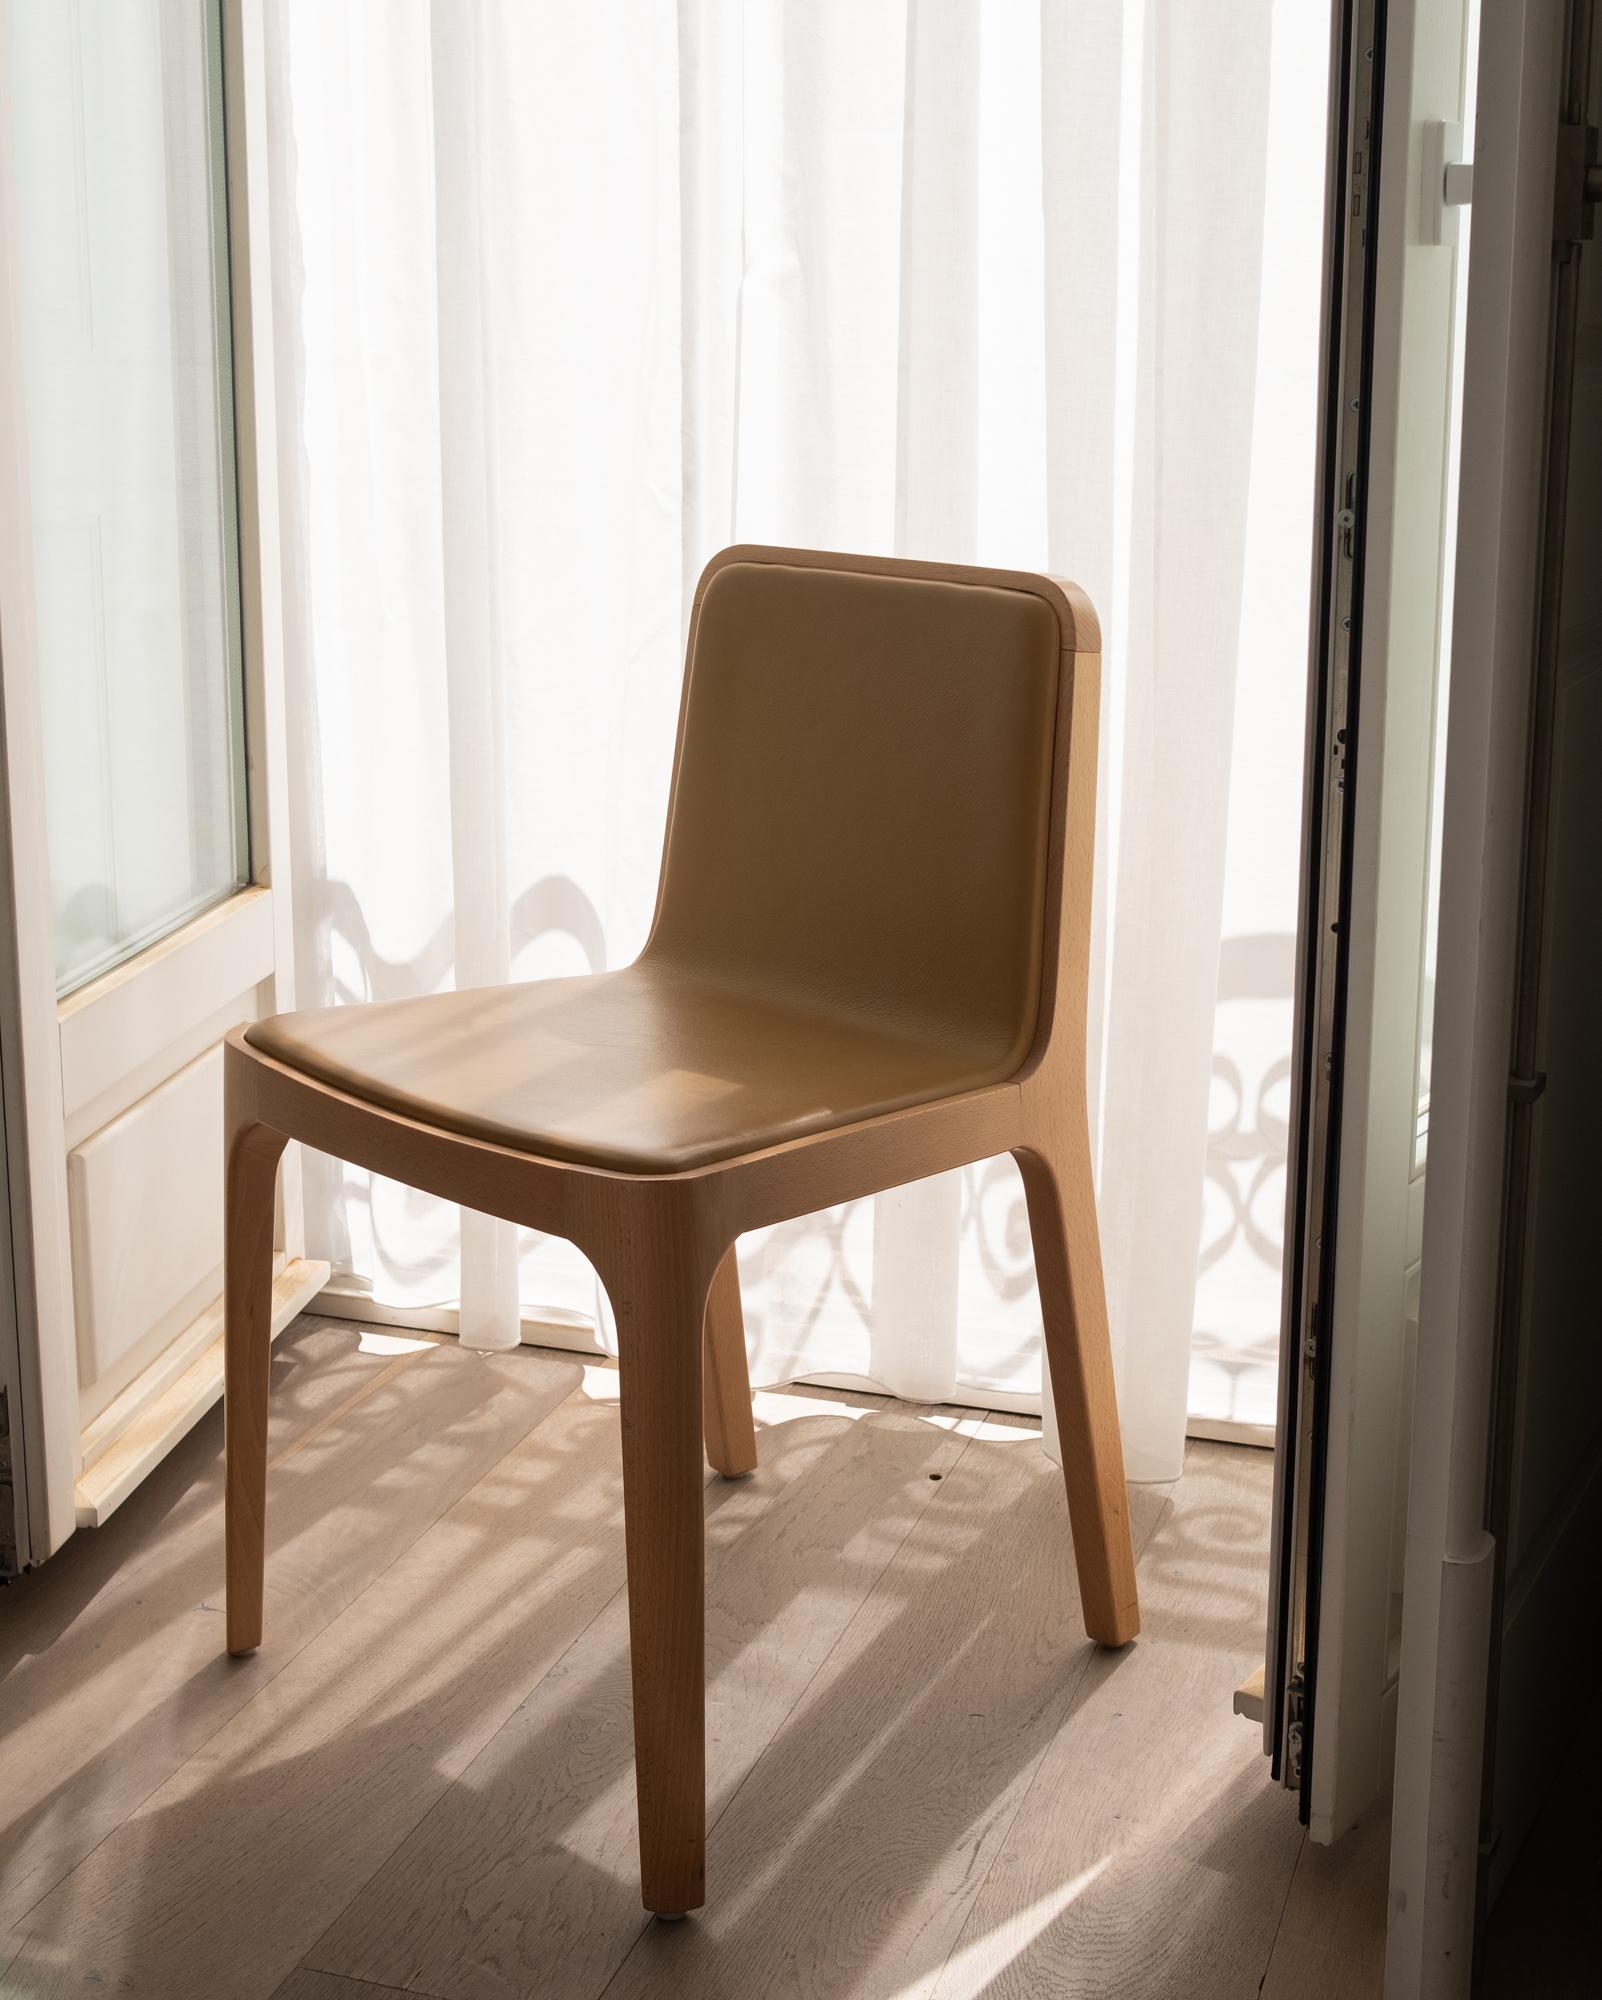 Minimalist Modern Chair in Beech Wood Fabric Upholstery In New Condition For Sale In Lisbon, PT